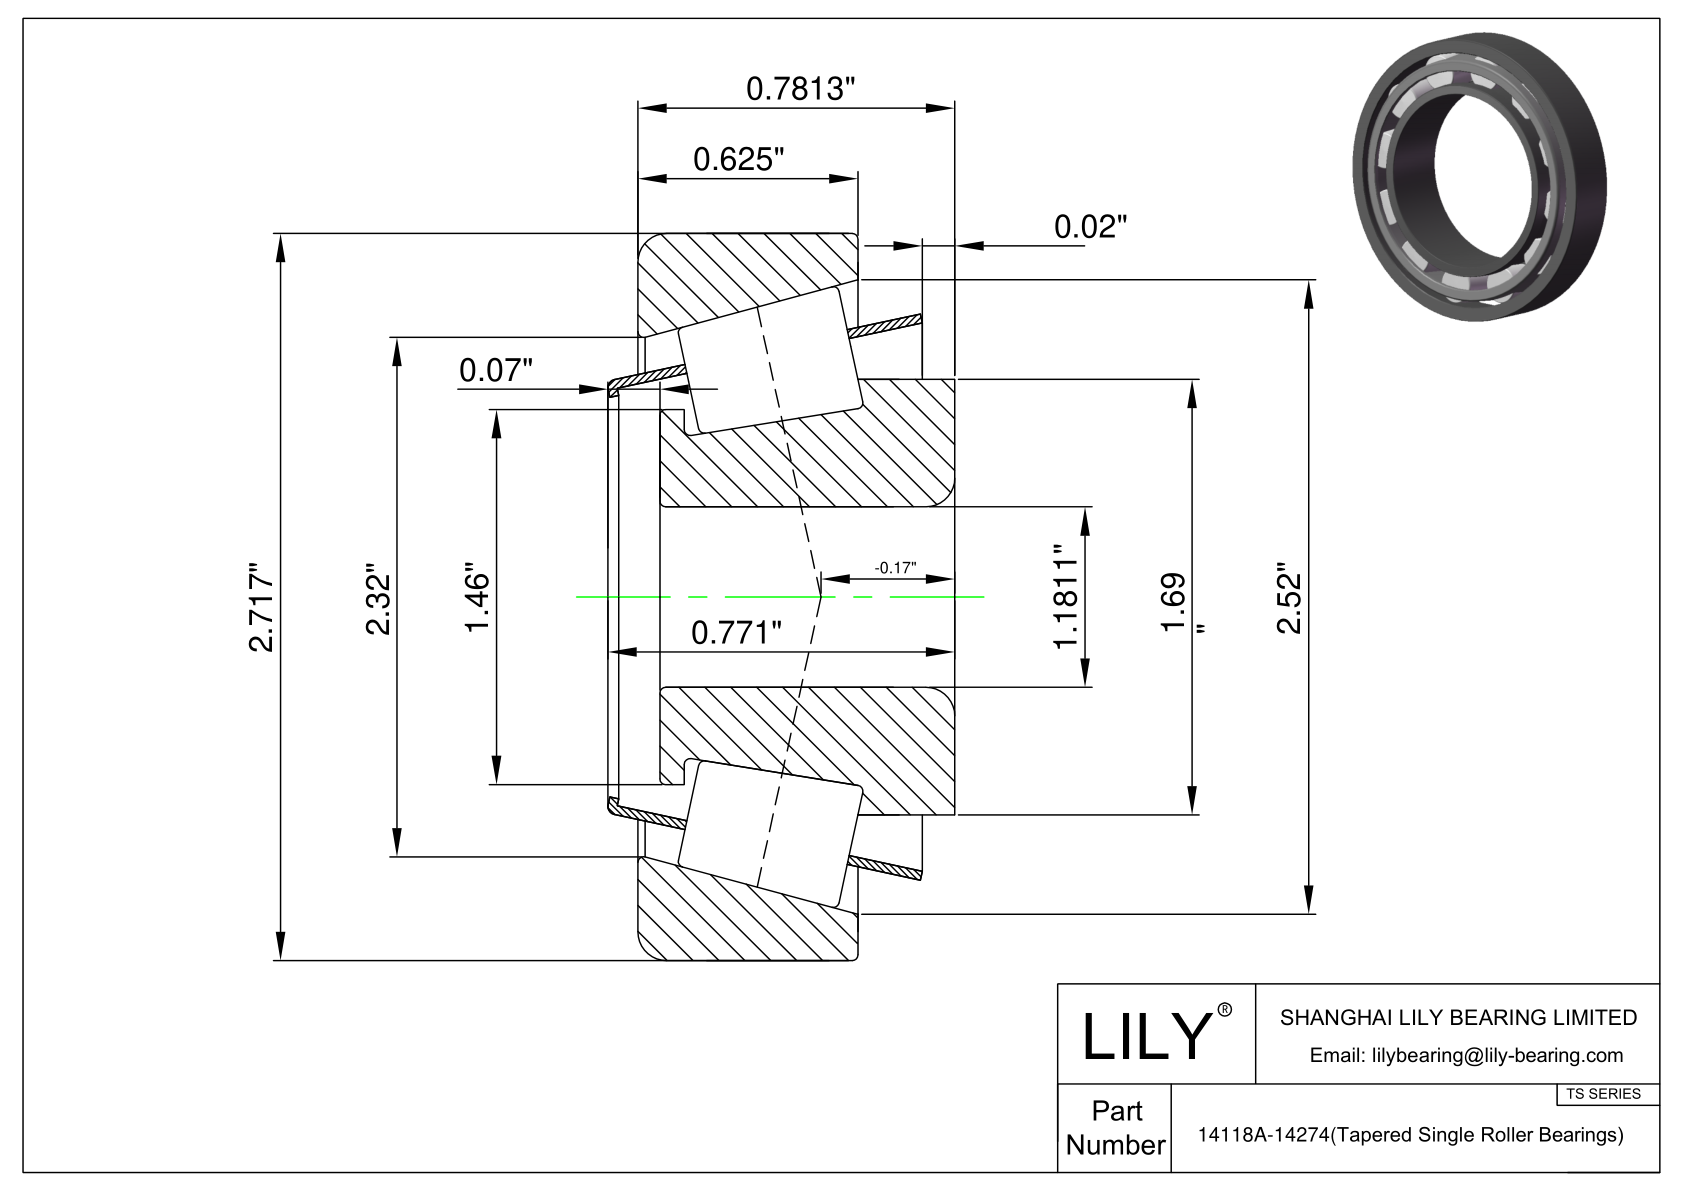 14118A-14274 TS (Tapered Single Roller Bearings) (Imperial) cad drawing